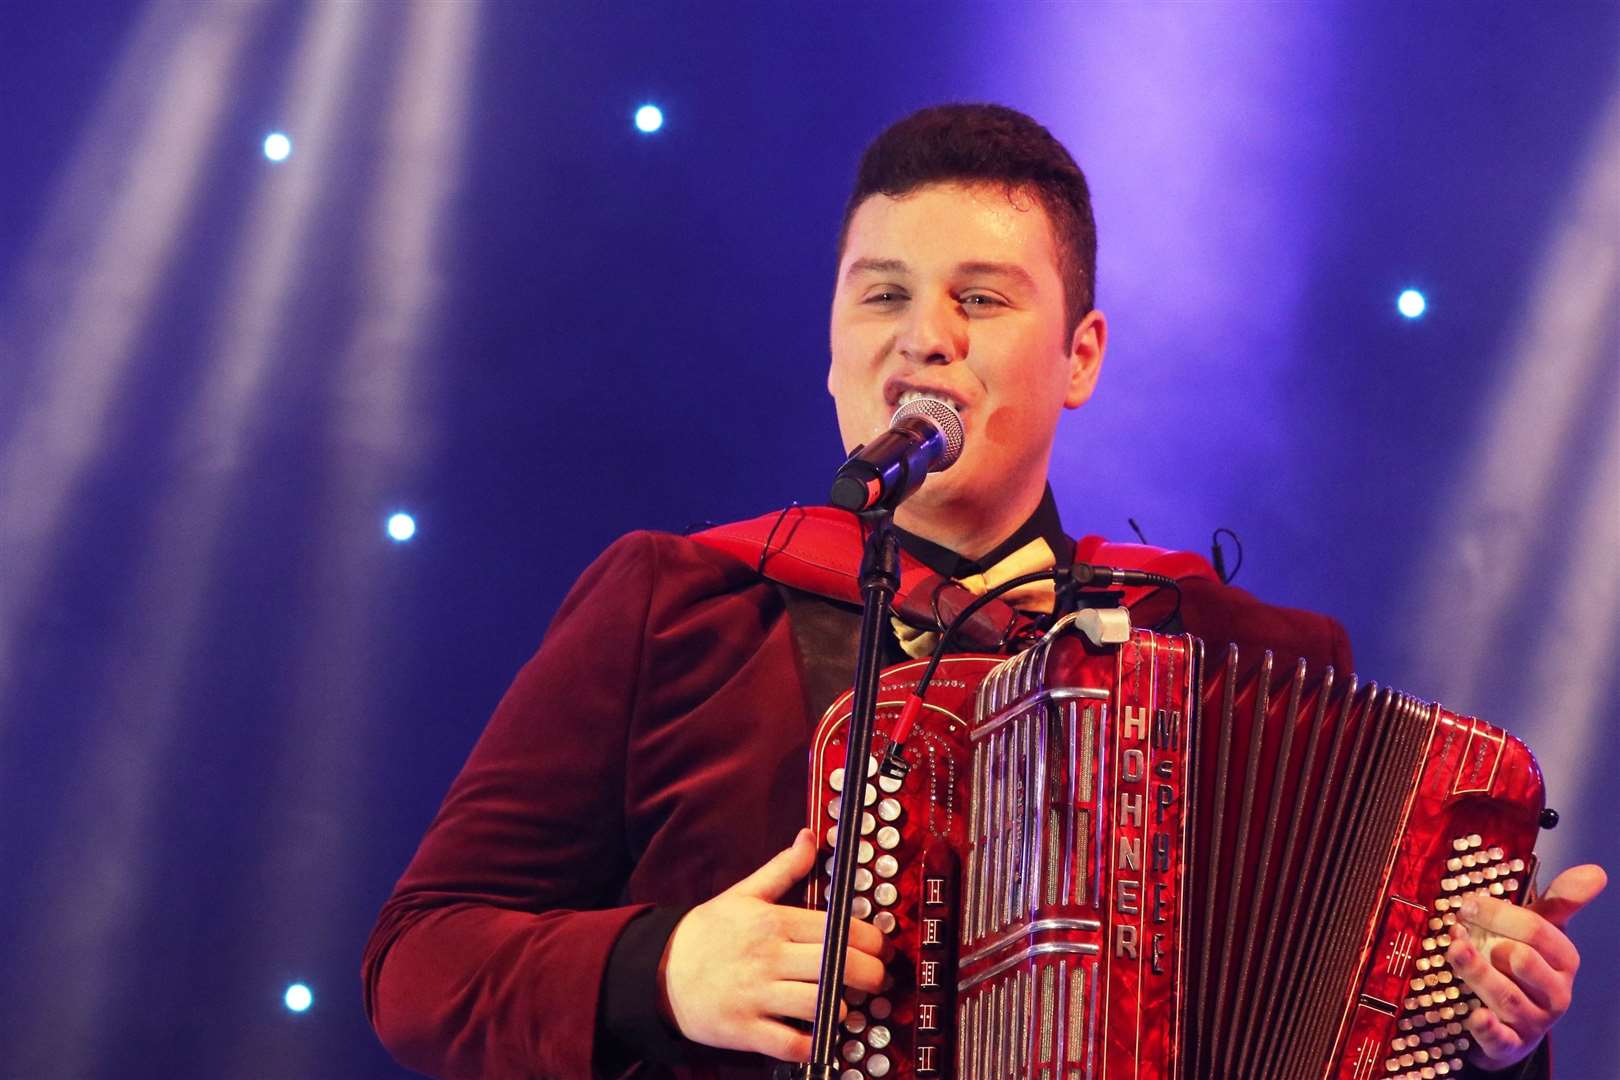 Brandon McPhee and his band are due to perform in Fochabers later this month.